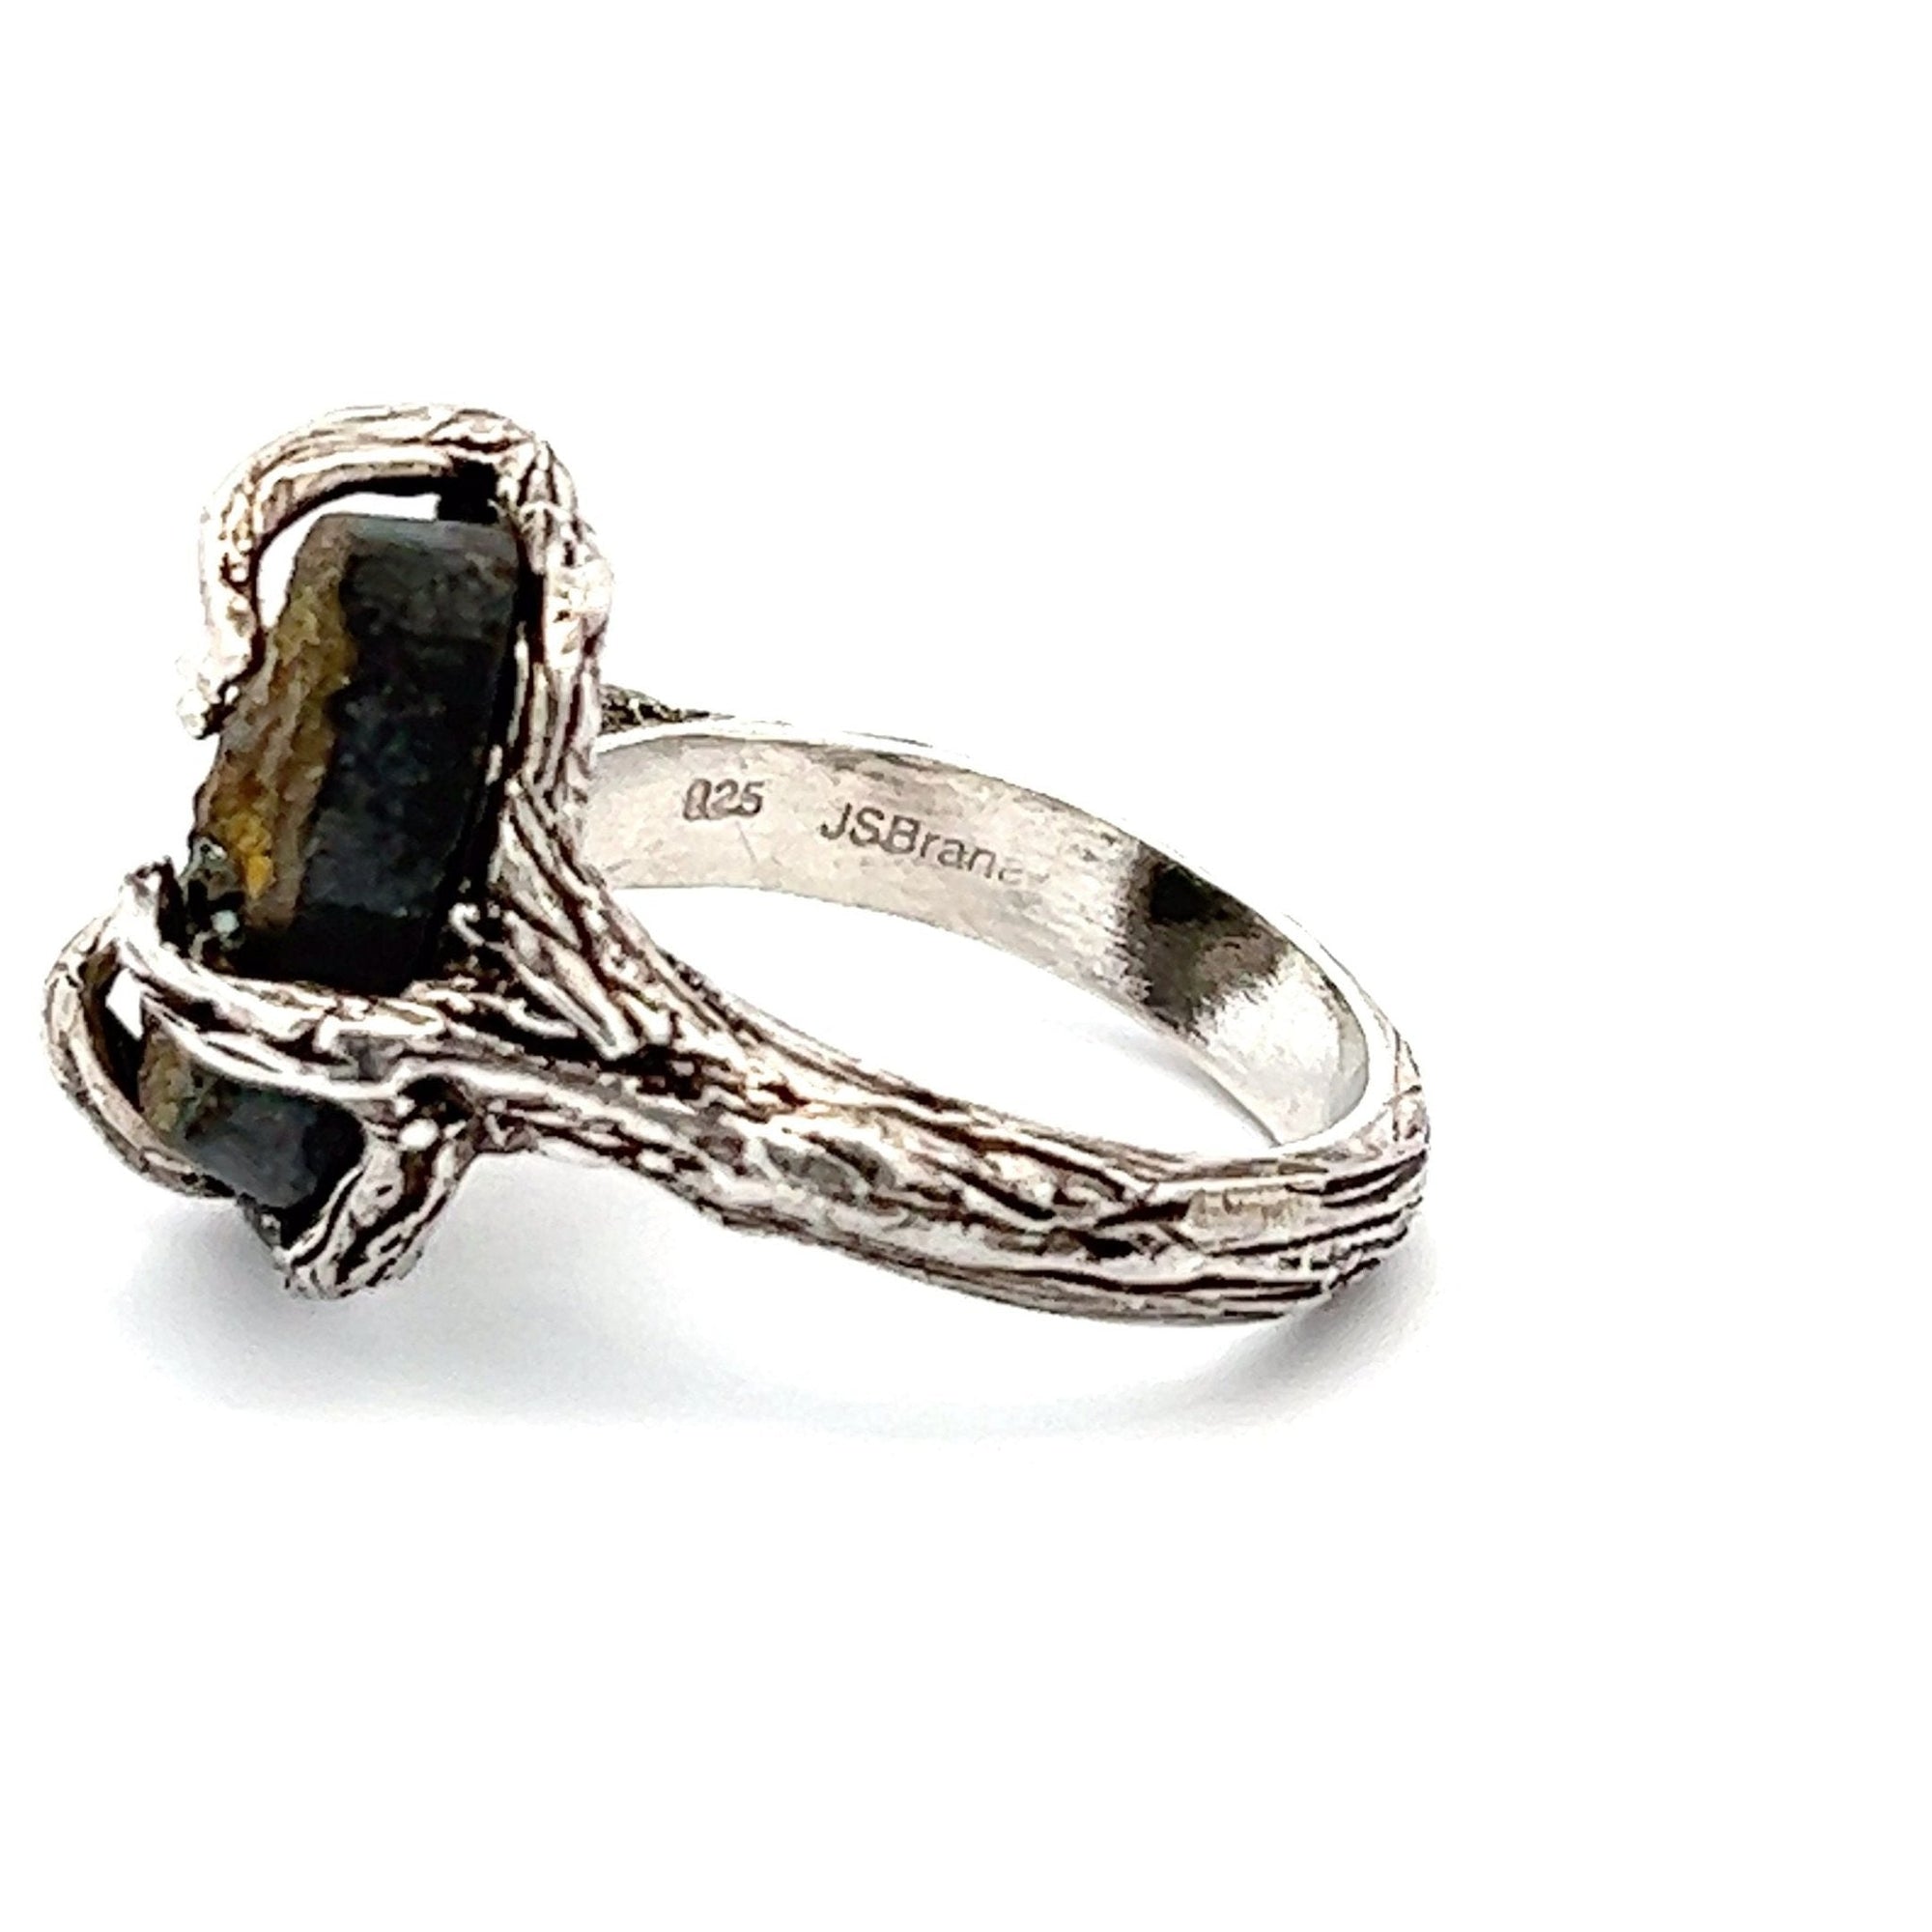 9 CT Pyrite Sterling Silver Tree Branch Ring - Side View